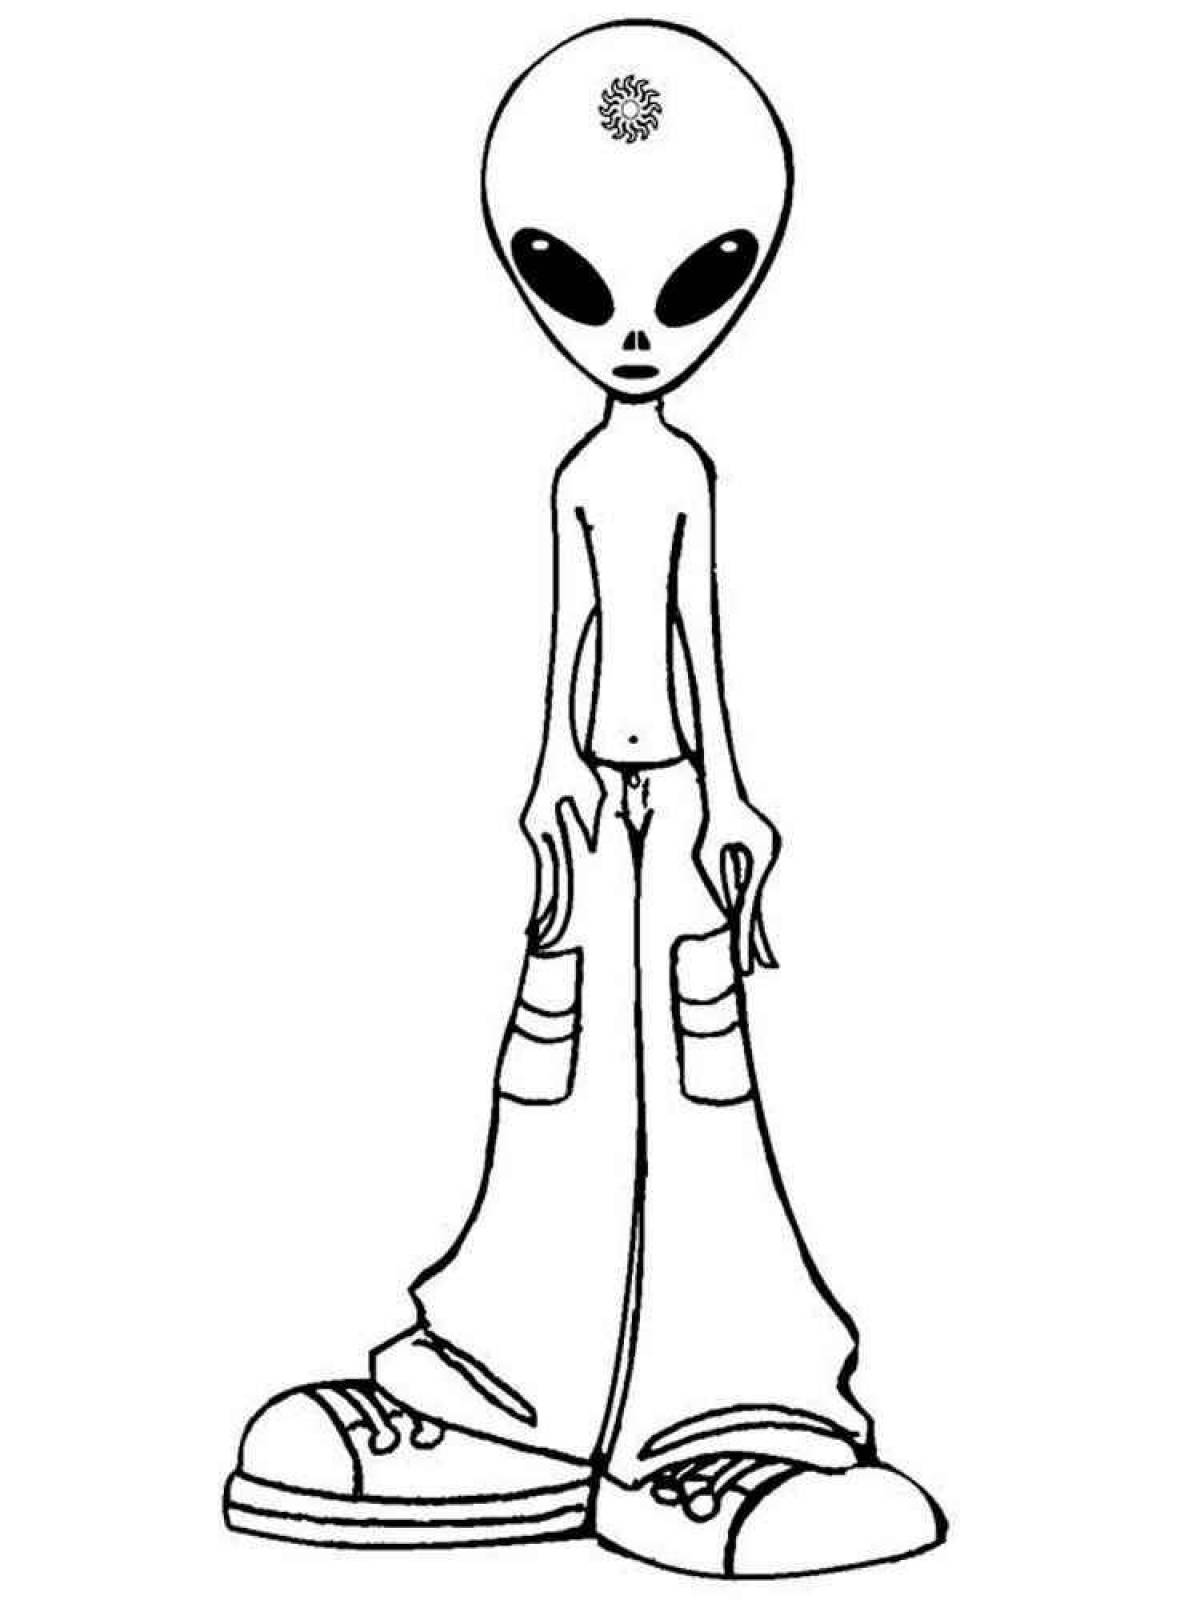 Color-fiesta aliens coloring page for kids